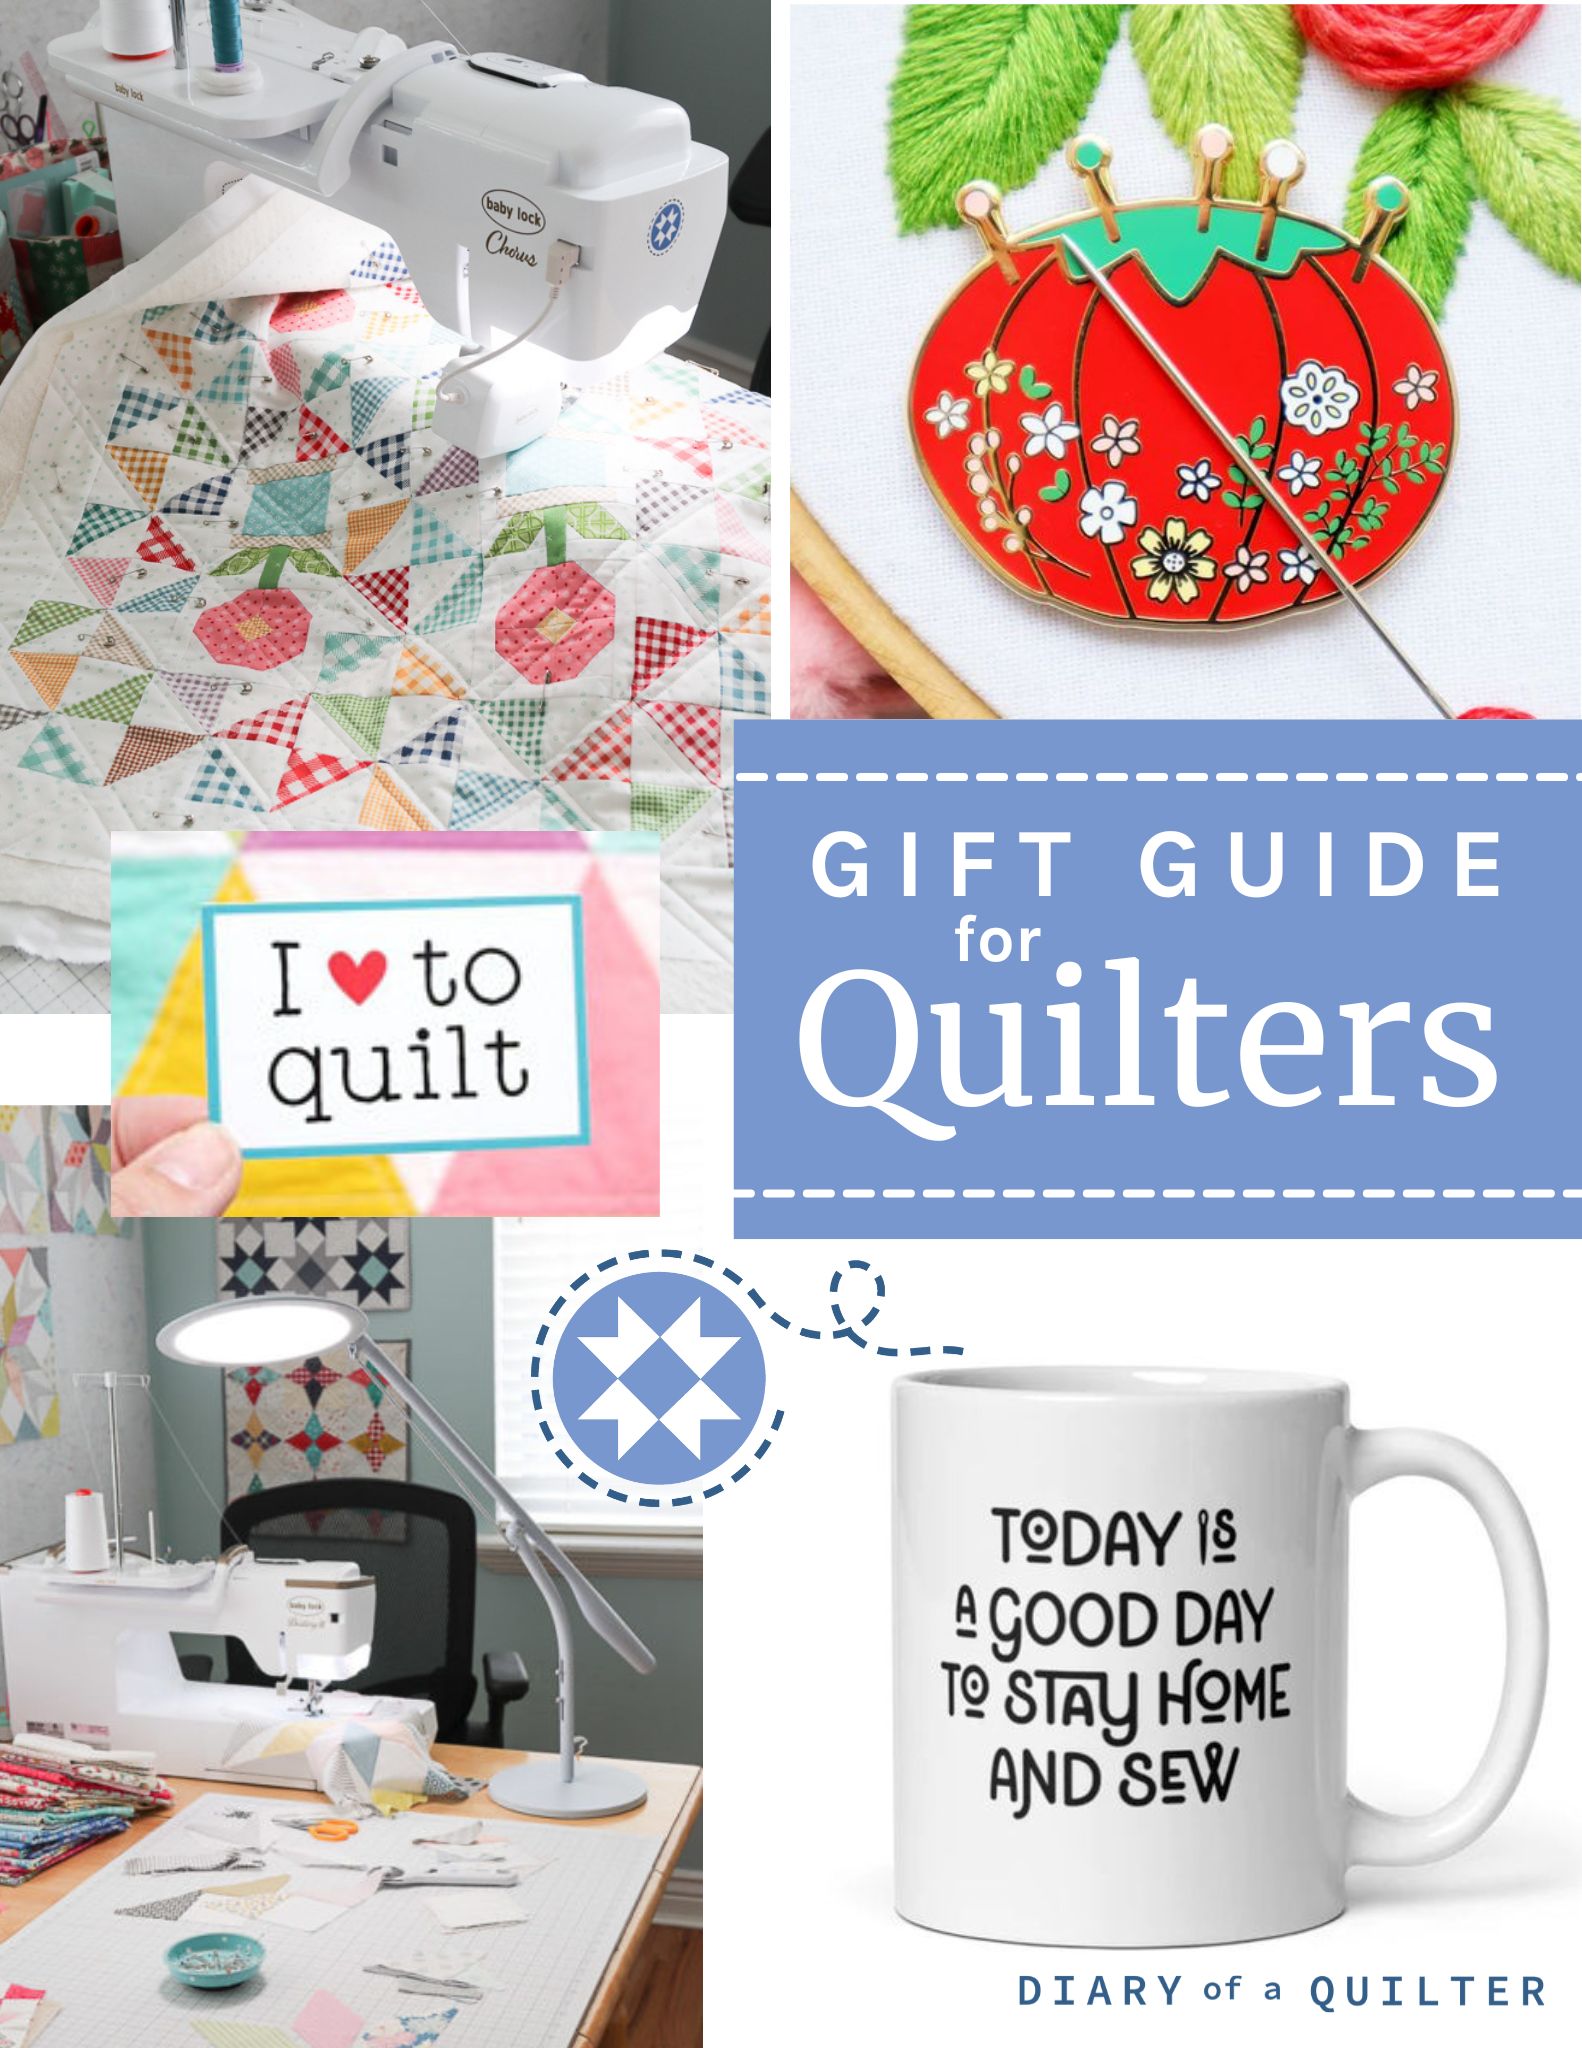 Quilt Shirt, Quilting Gifts, Gifts for Quilters, Quilting Tshirts